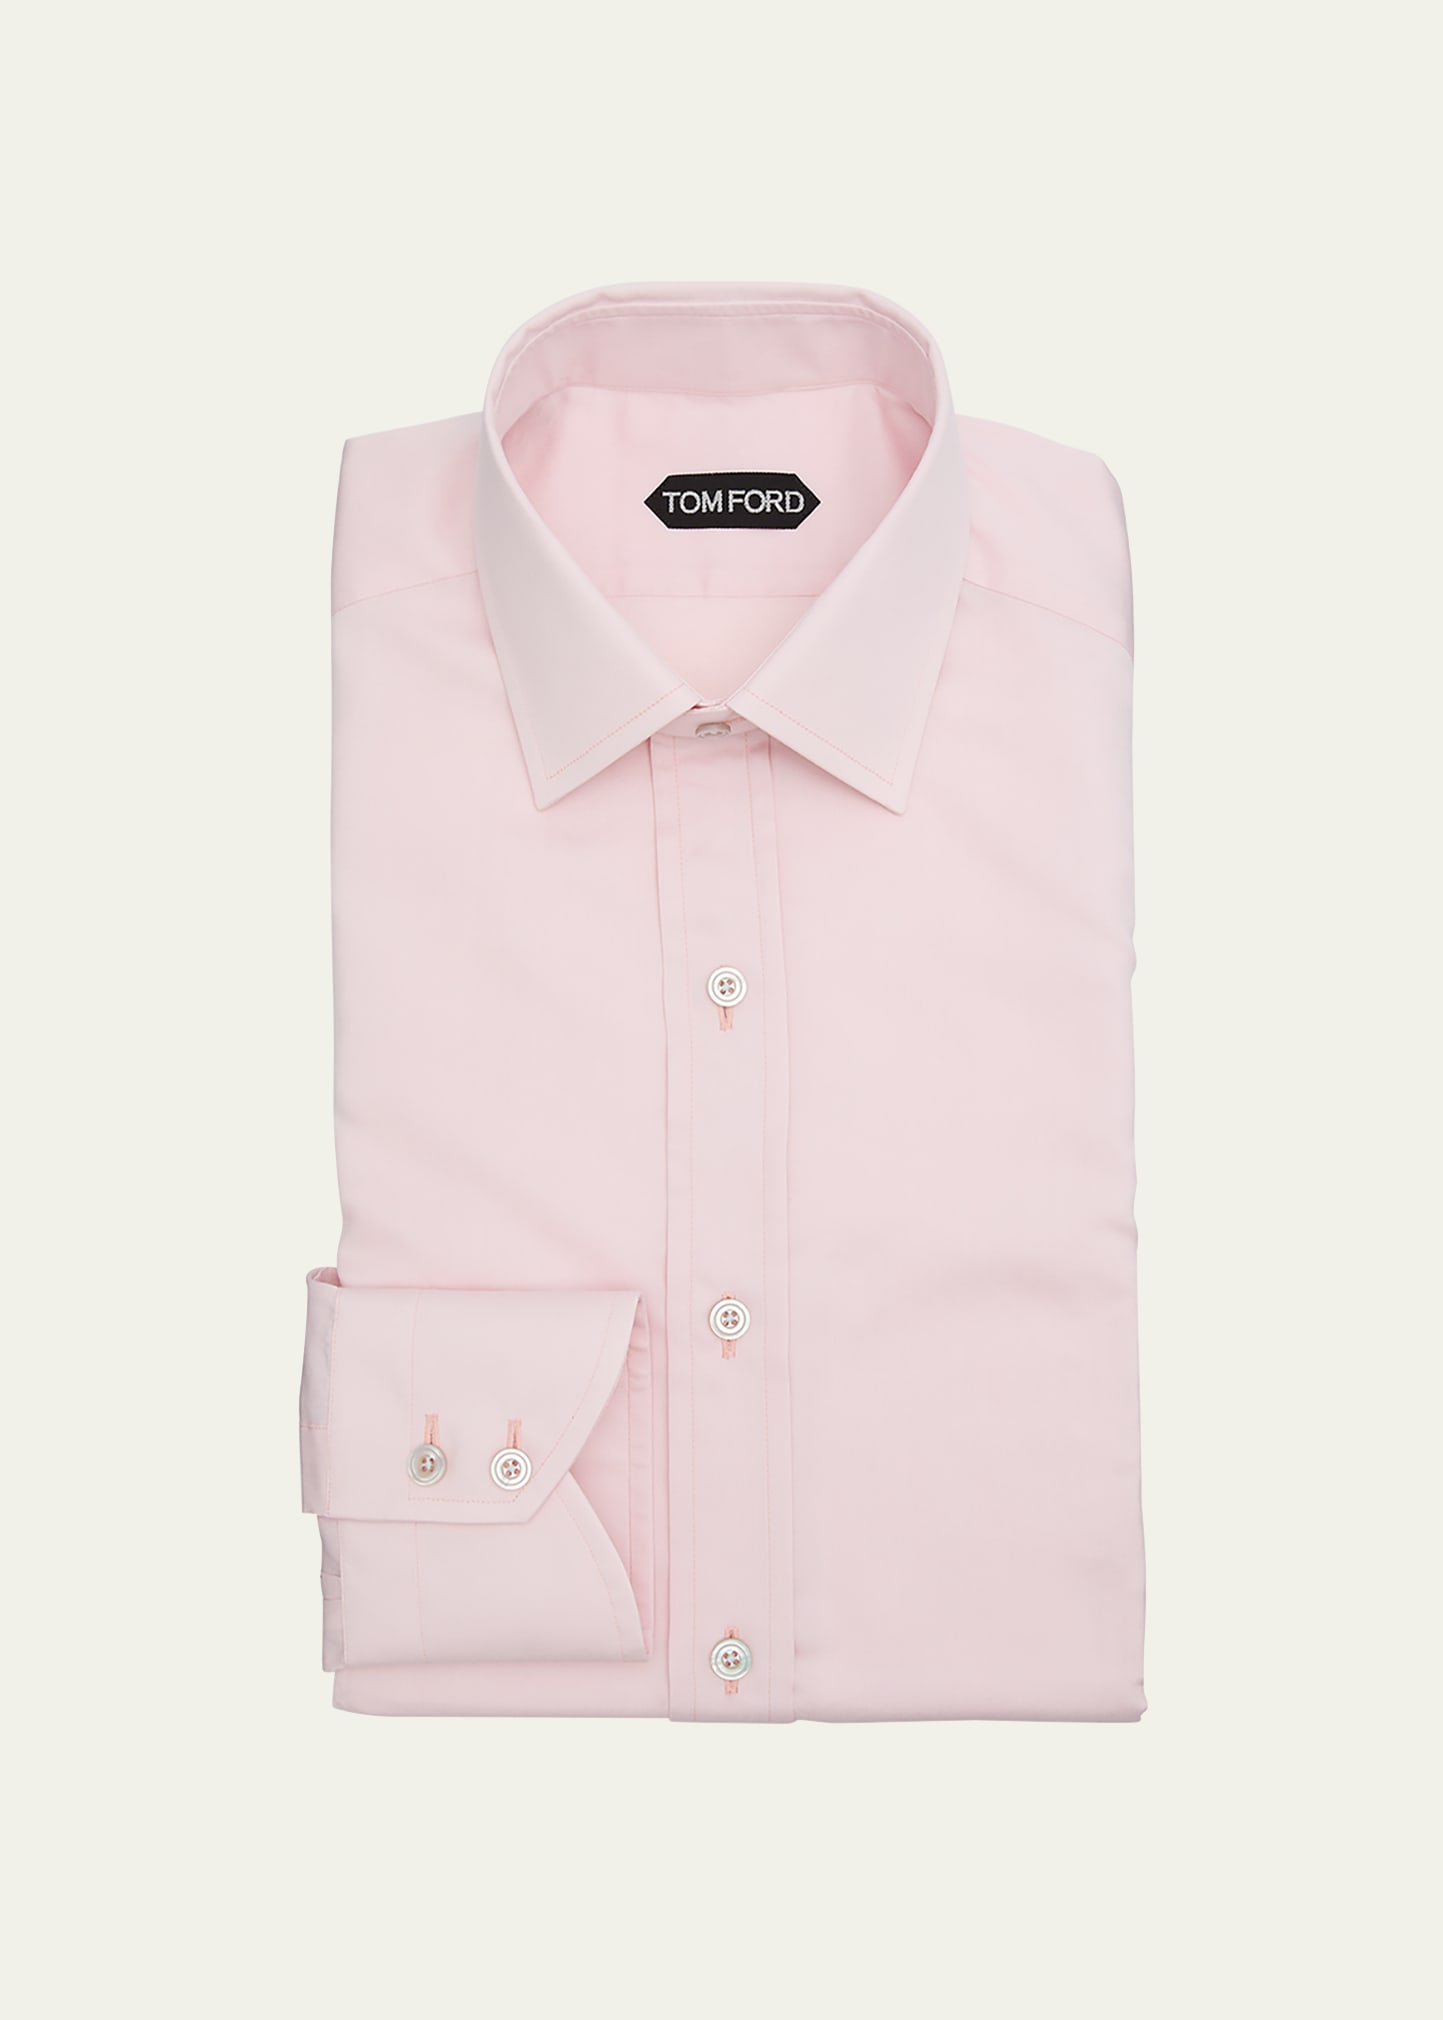 Tom Ford Slm Smll Cllr Pwdr Pink Co Silk Shirt In Powder Pin